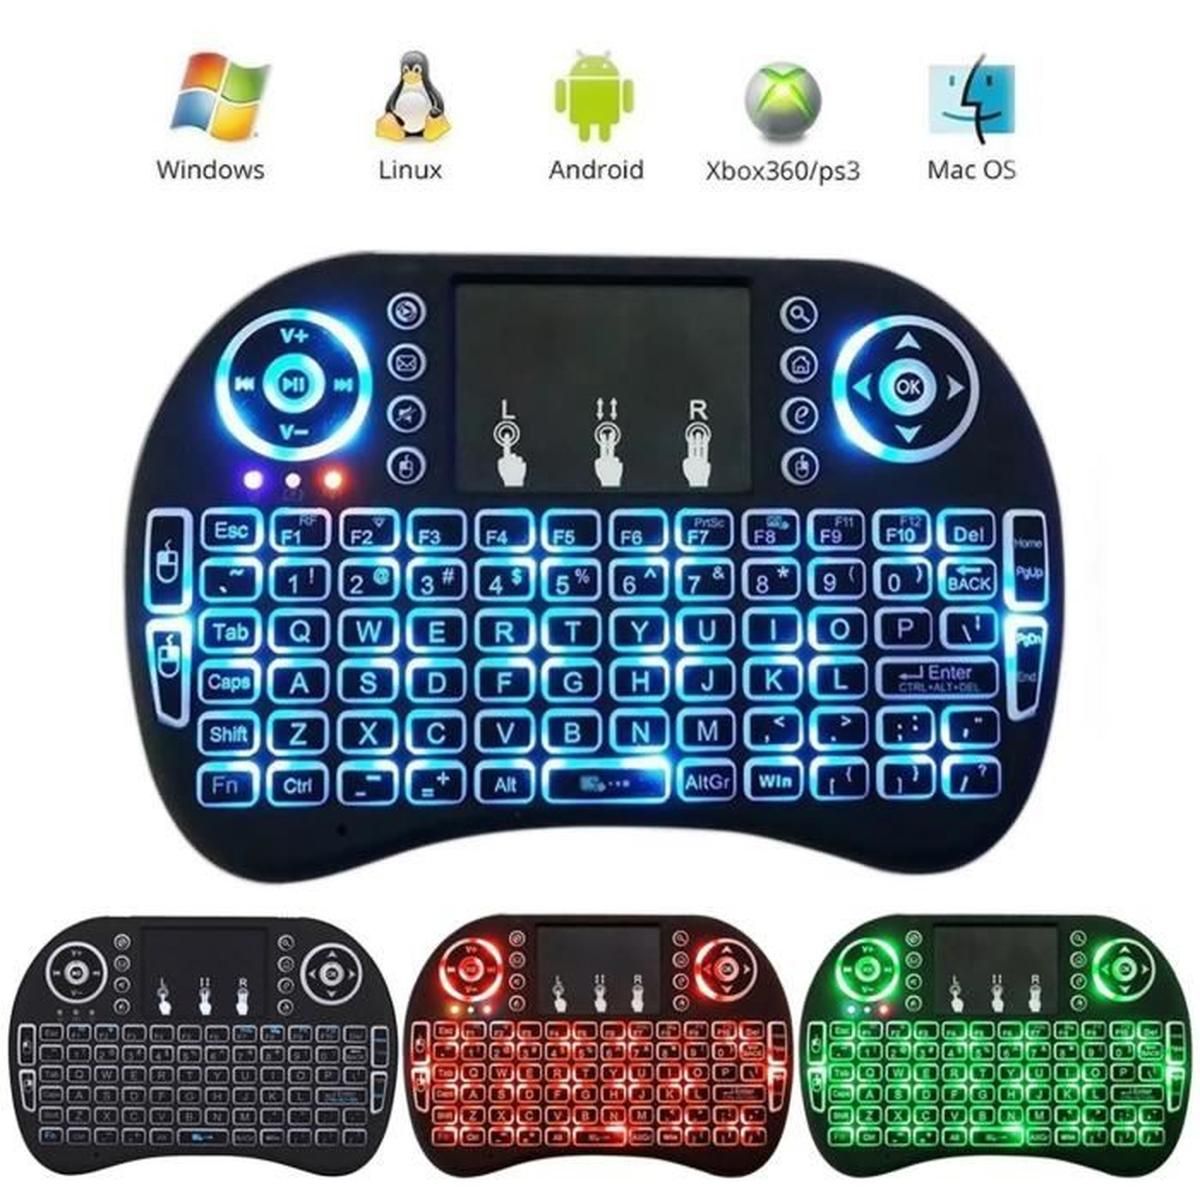 Cdiscount Tv Samsung Luxe Wireless touchpad Keyborad Pour Laptop android Tv ordinateur